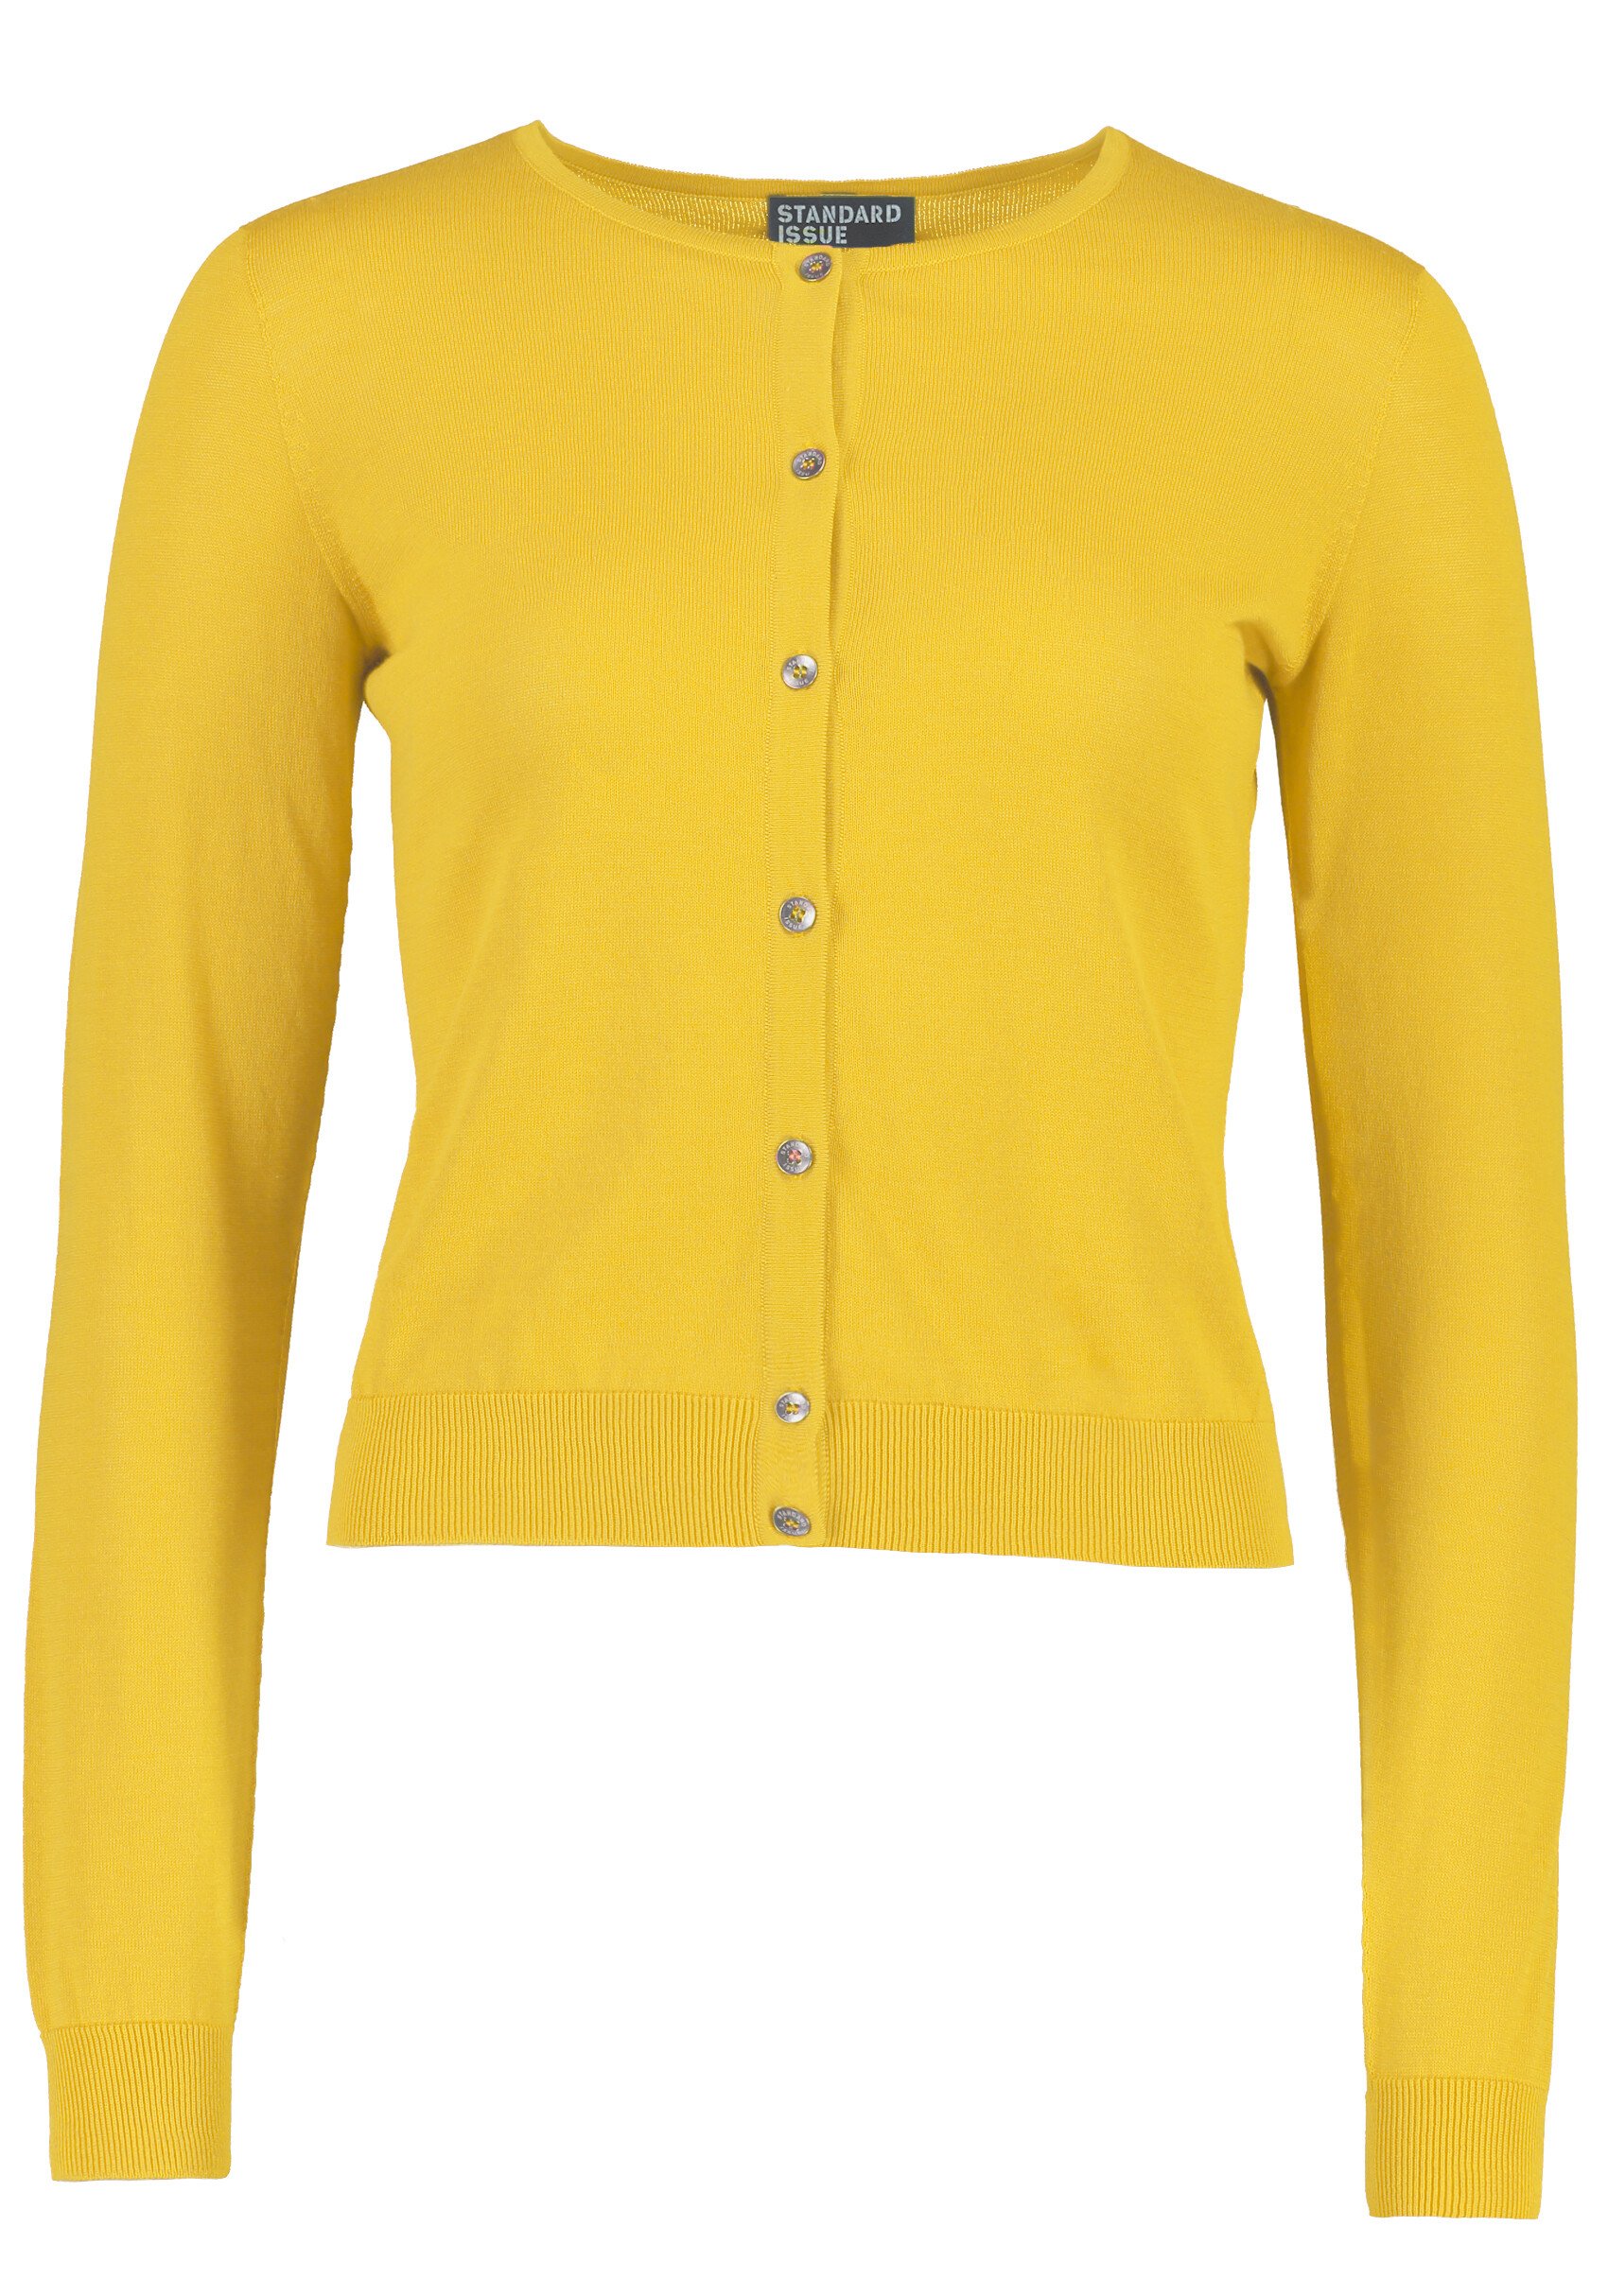 COTTON CREW CARDI (HONEY)- STANDARD ISSUE SP20 Boxing Day Sale